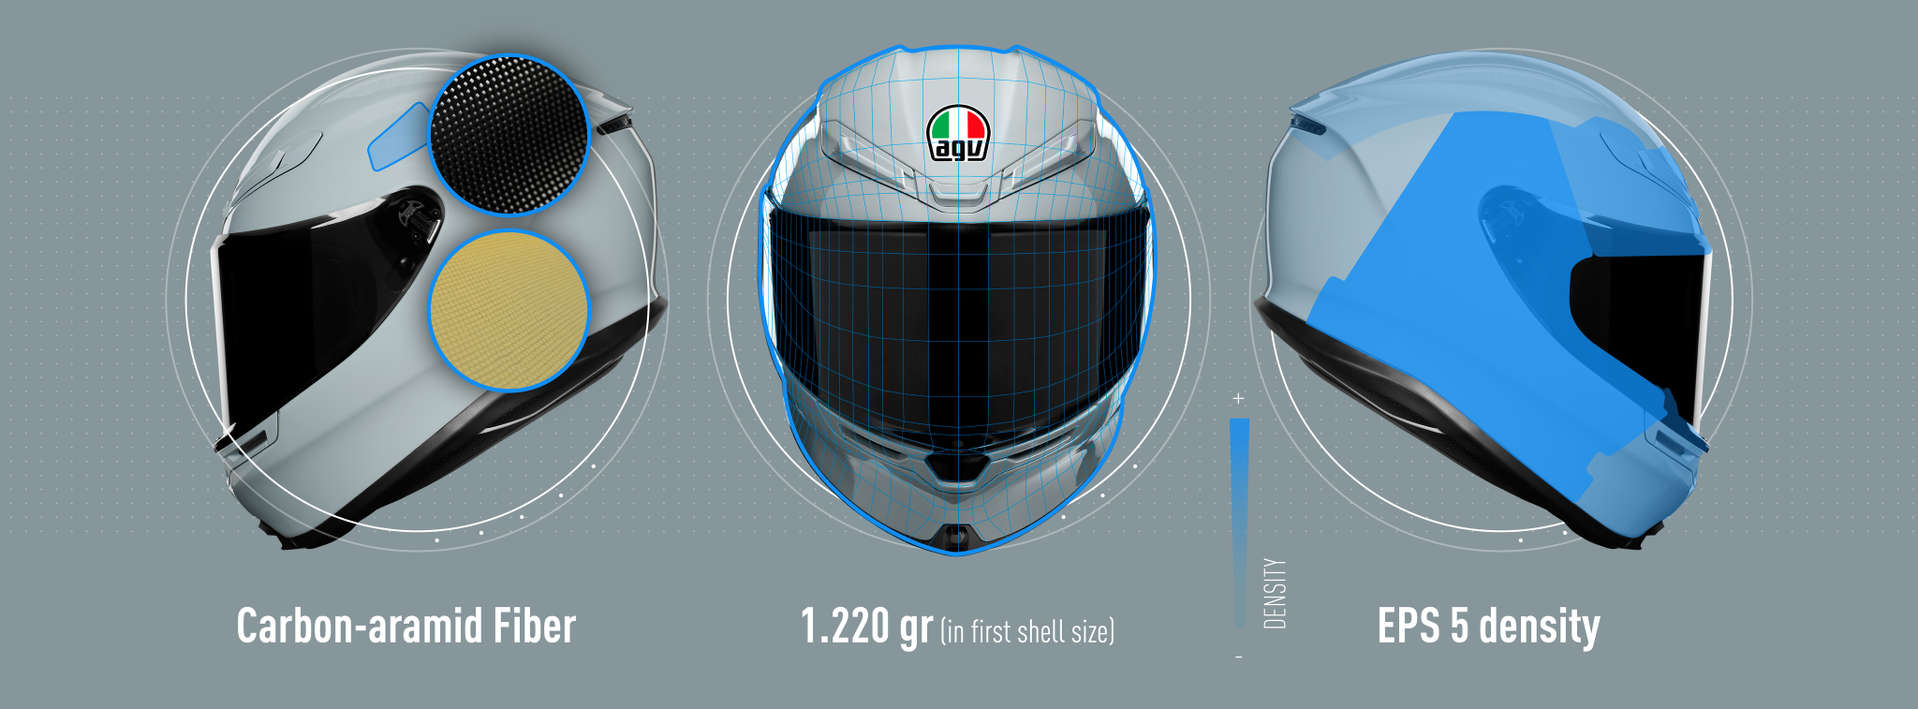 AGV K6 is 48% safer than the values required by regulation